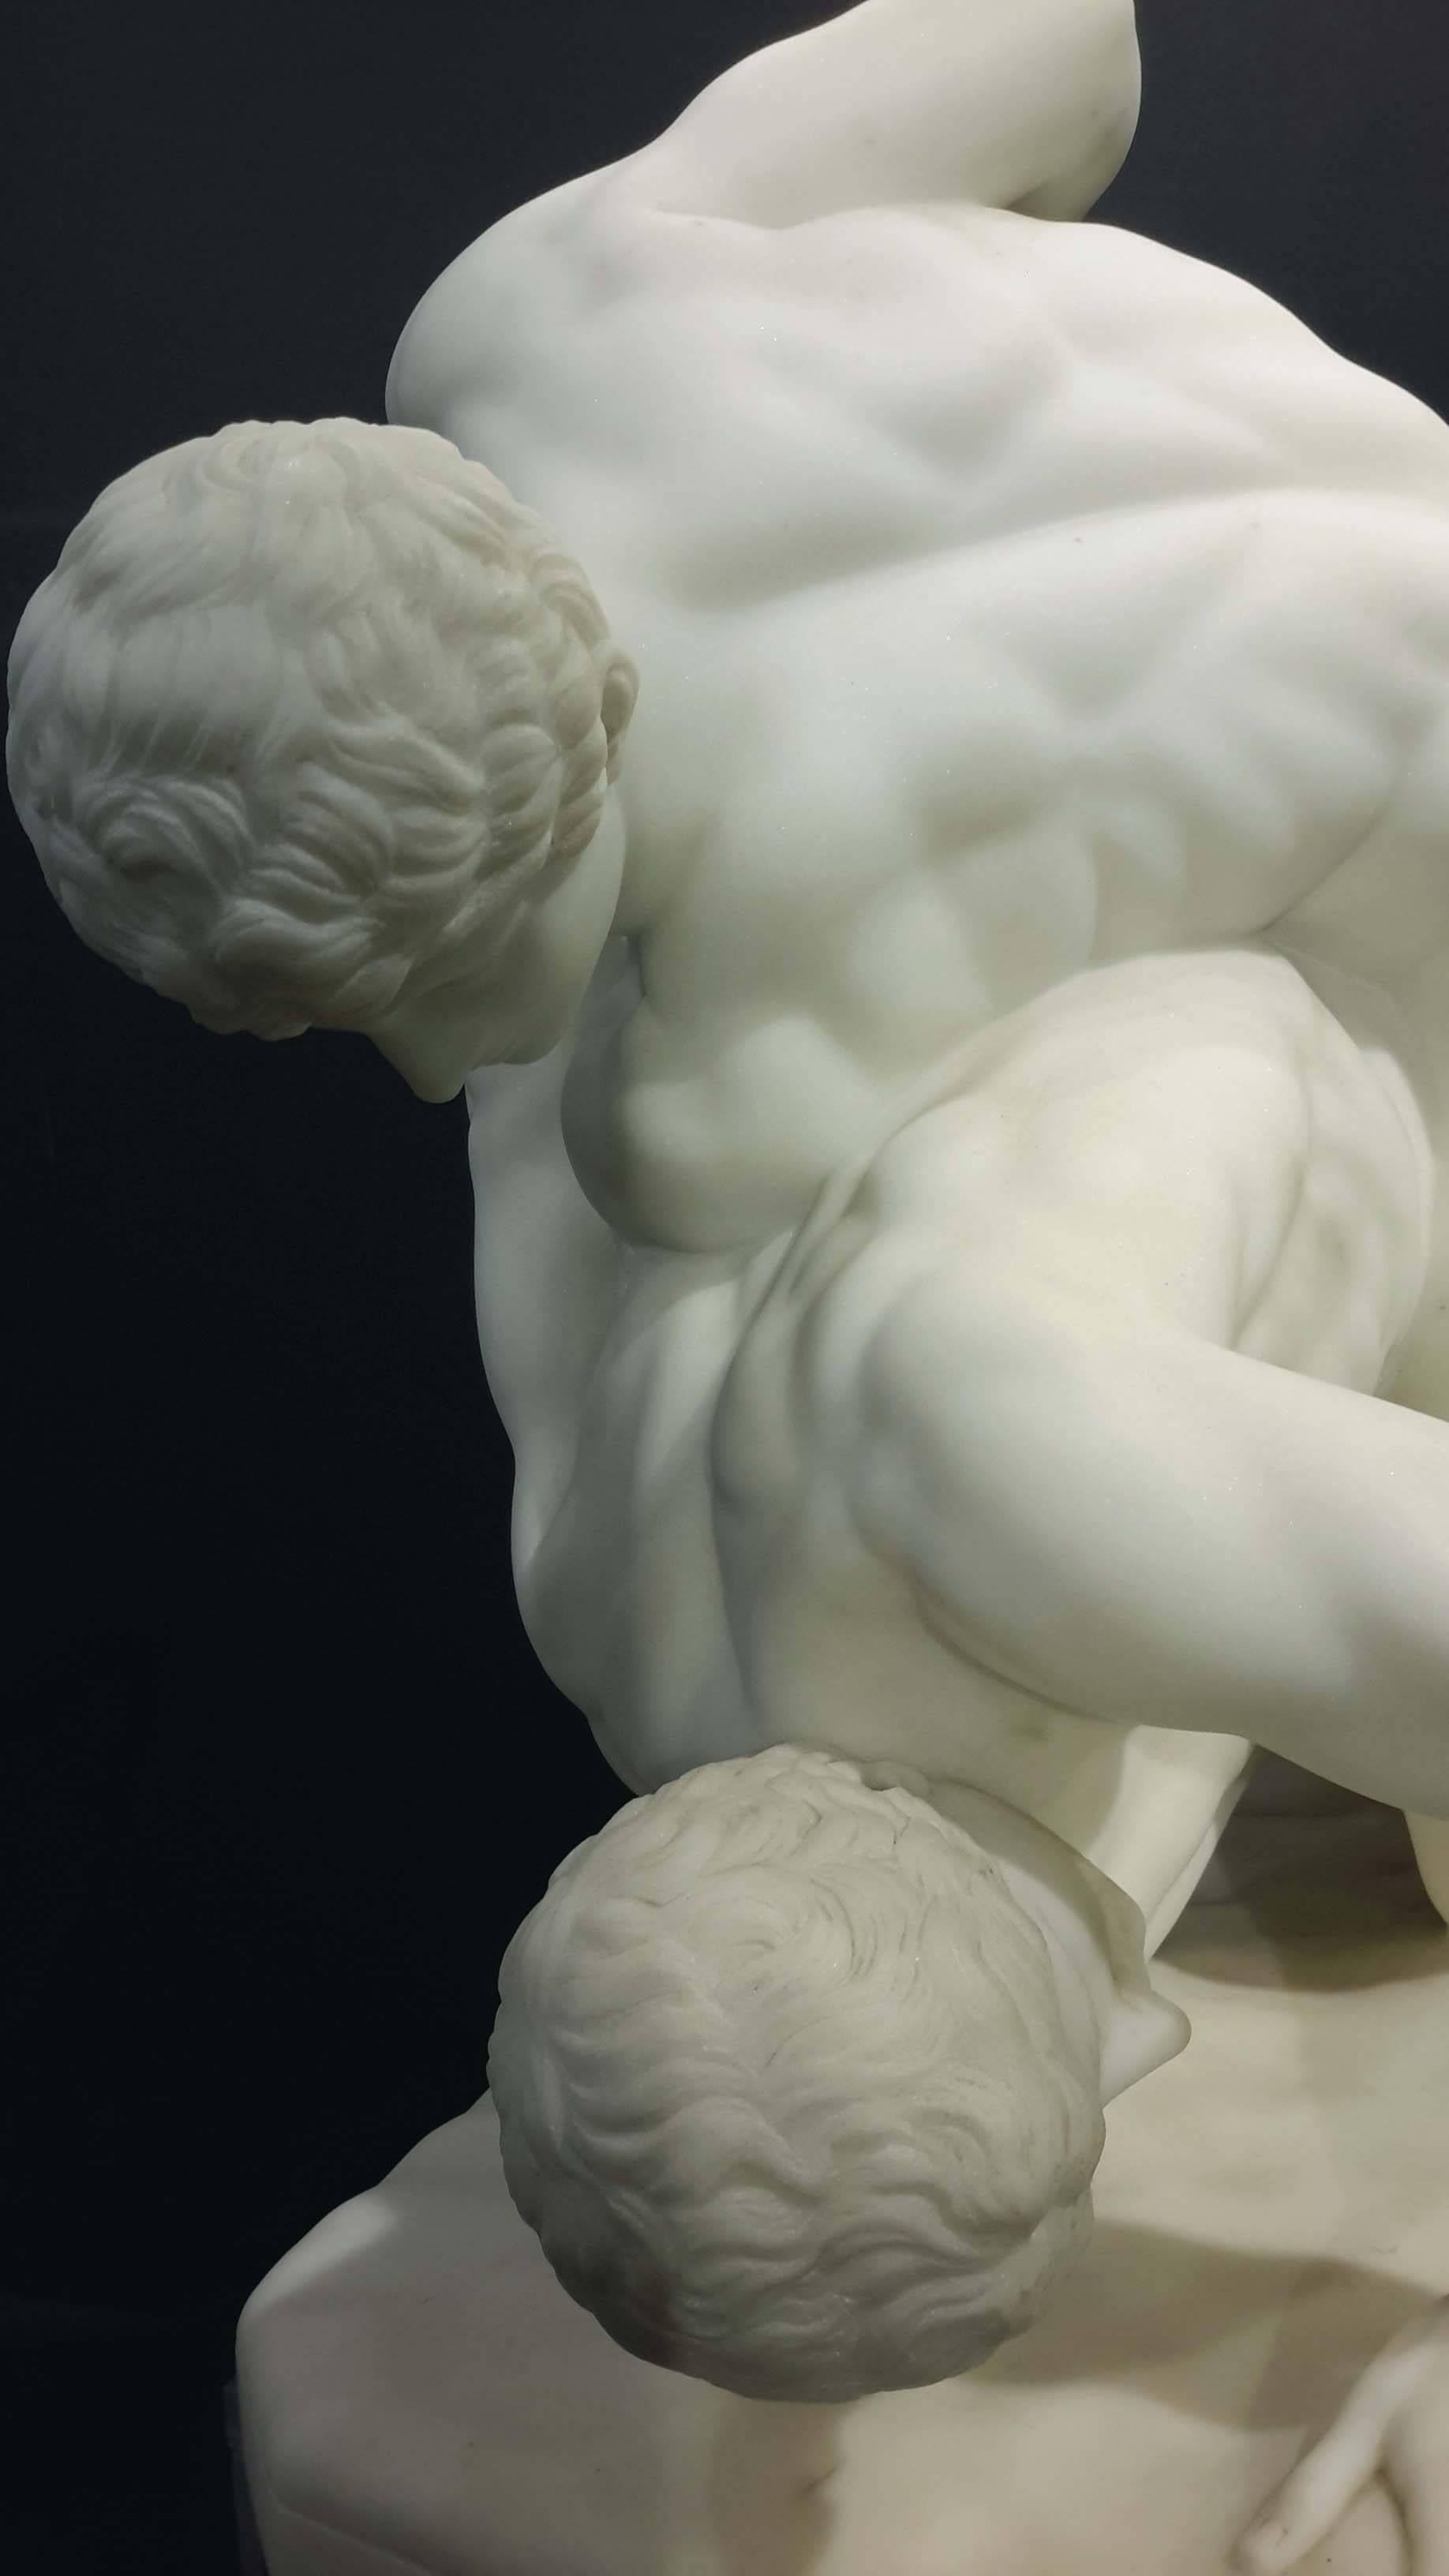 Carrera Marble Sculpture of Two Roman Wrestlers, 19th Century Grand Tour 1